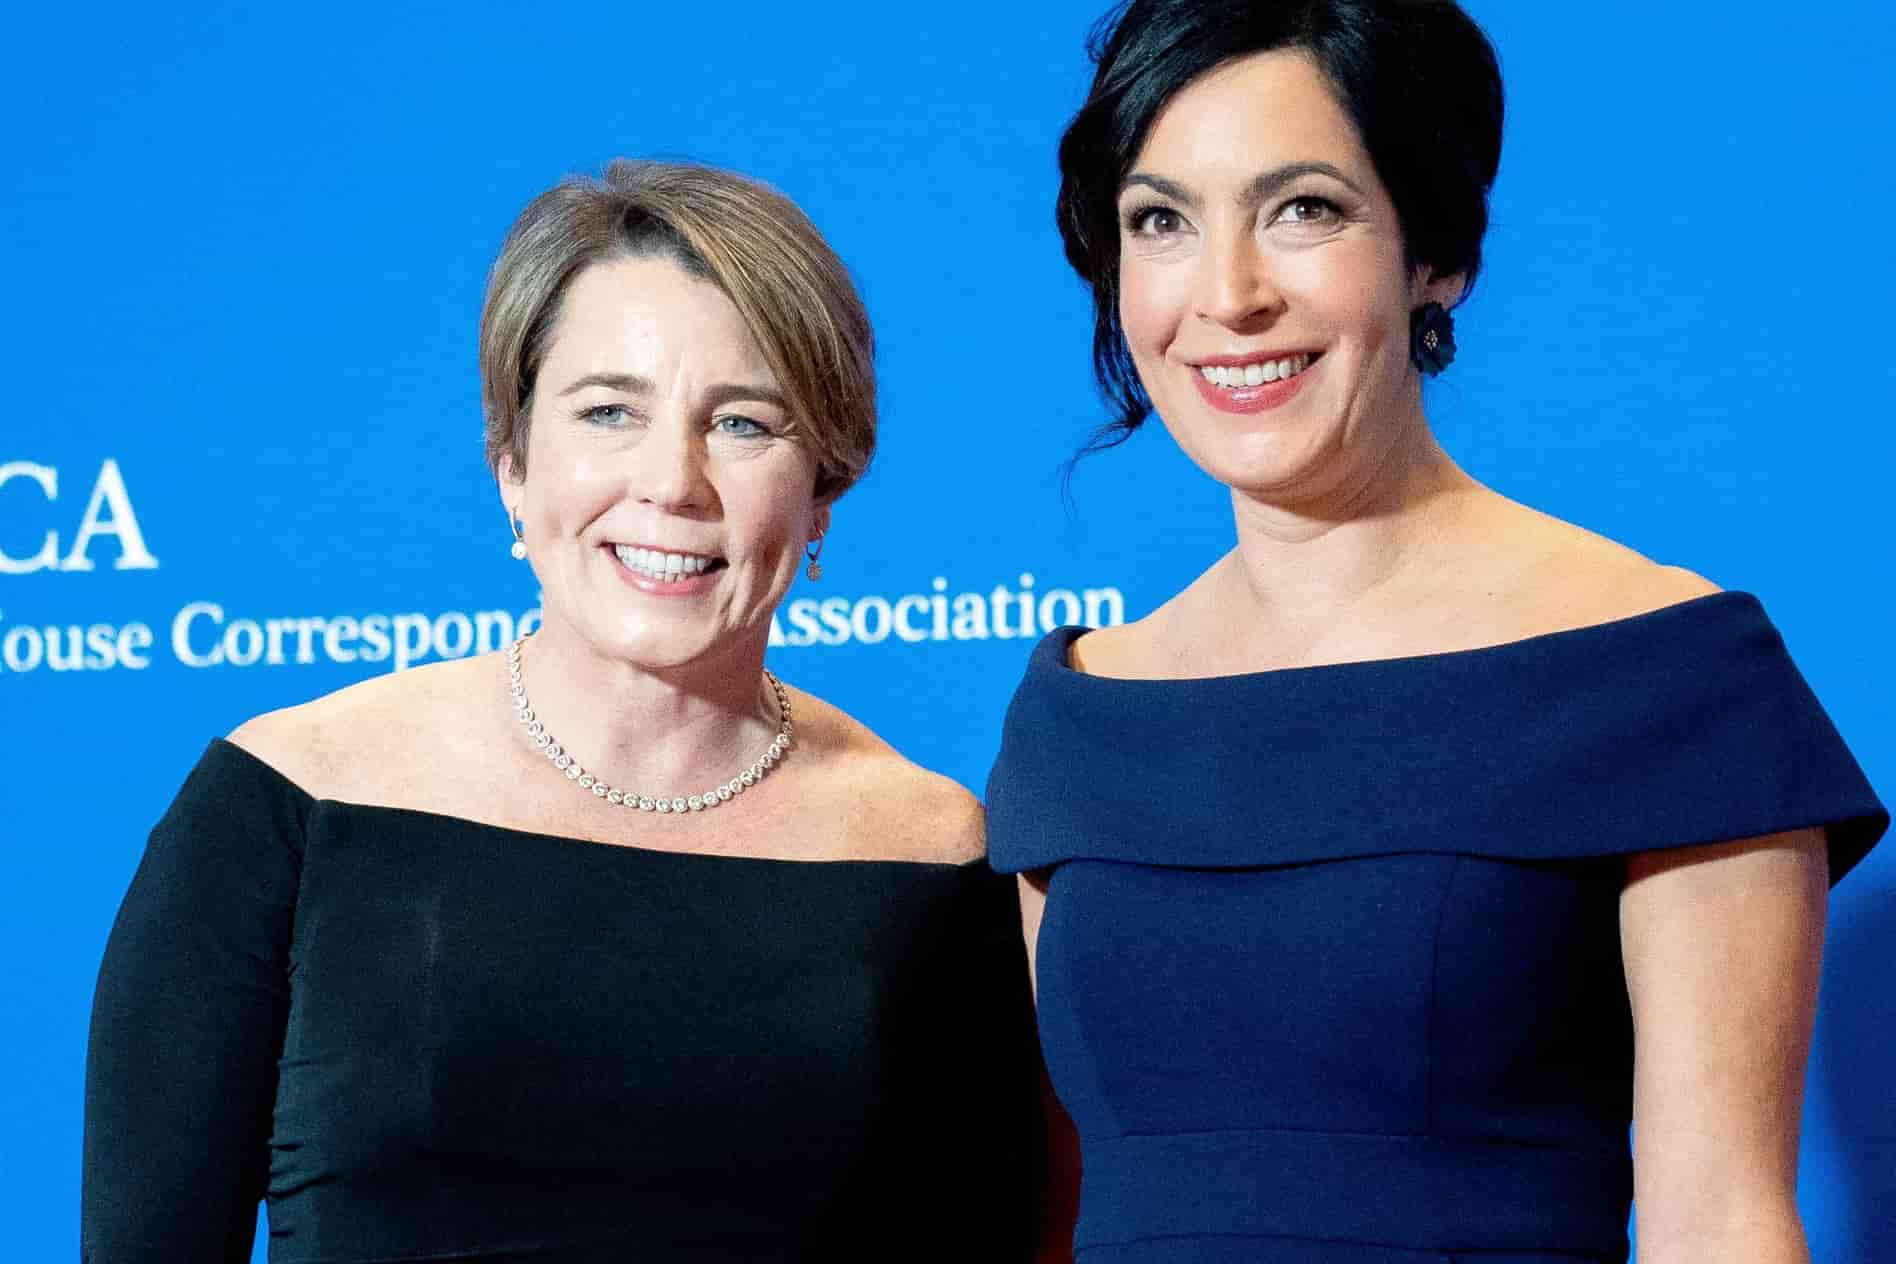 Image of Maura Healey and Joanna Lydgate as partners